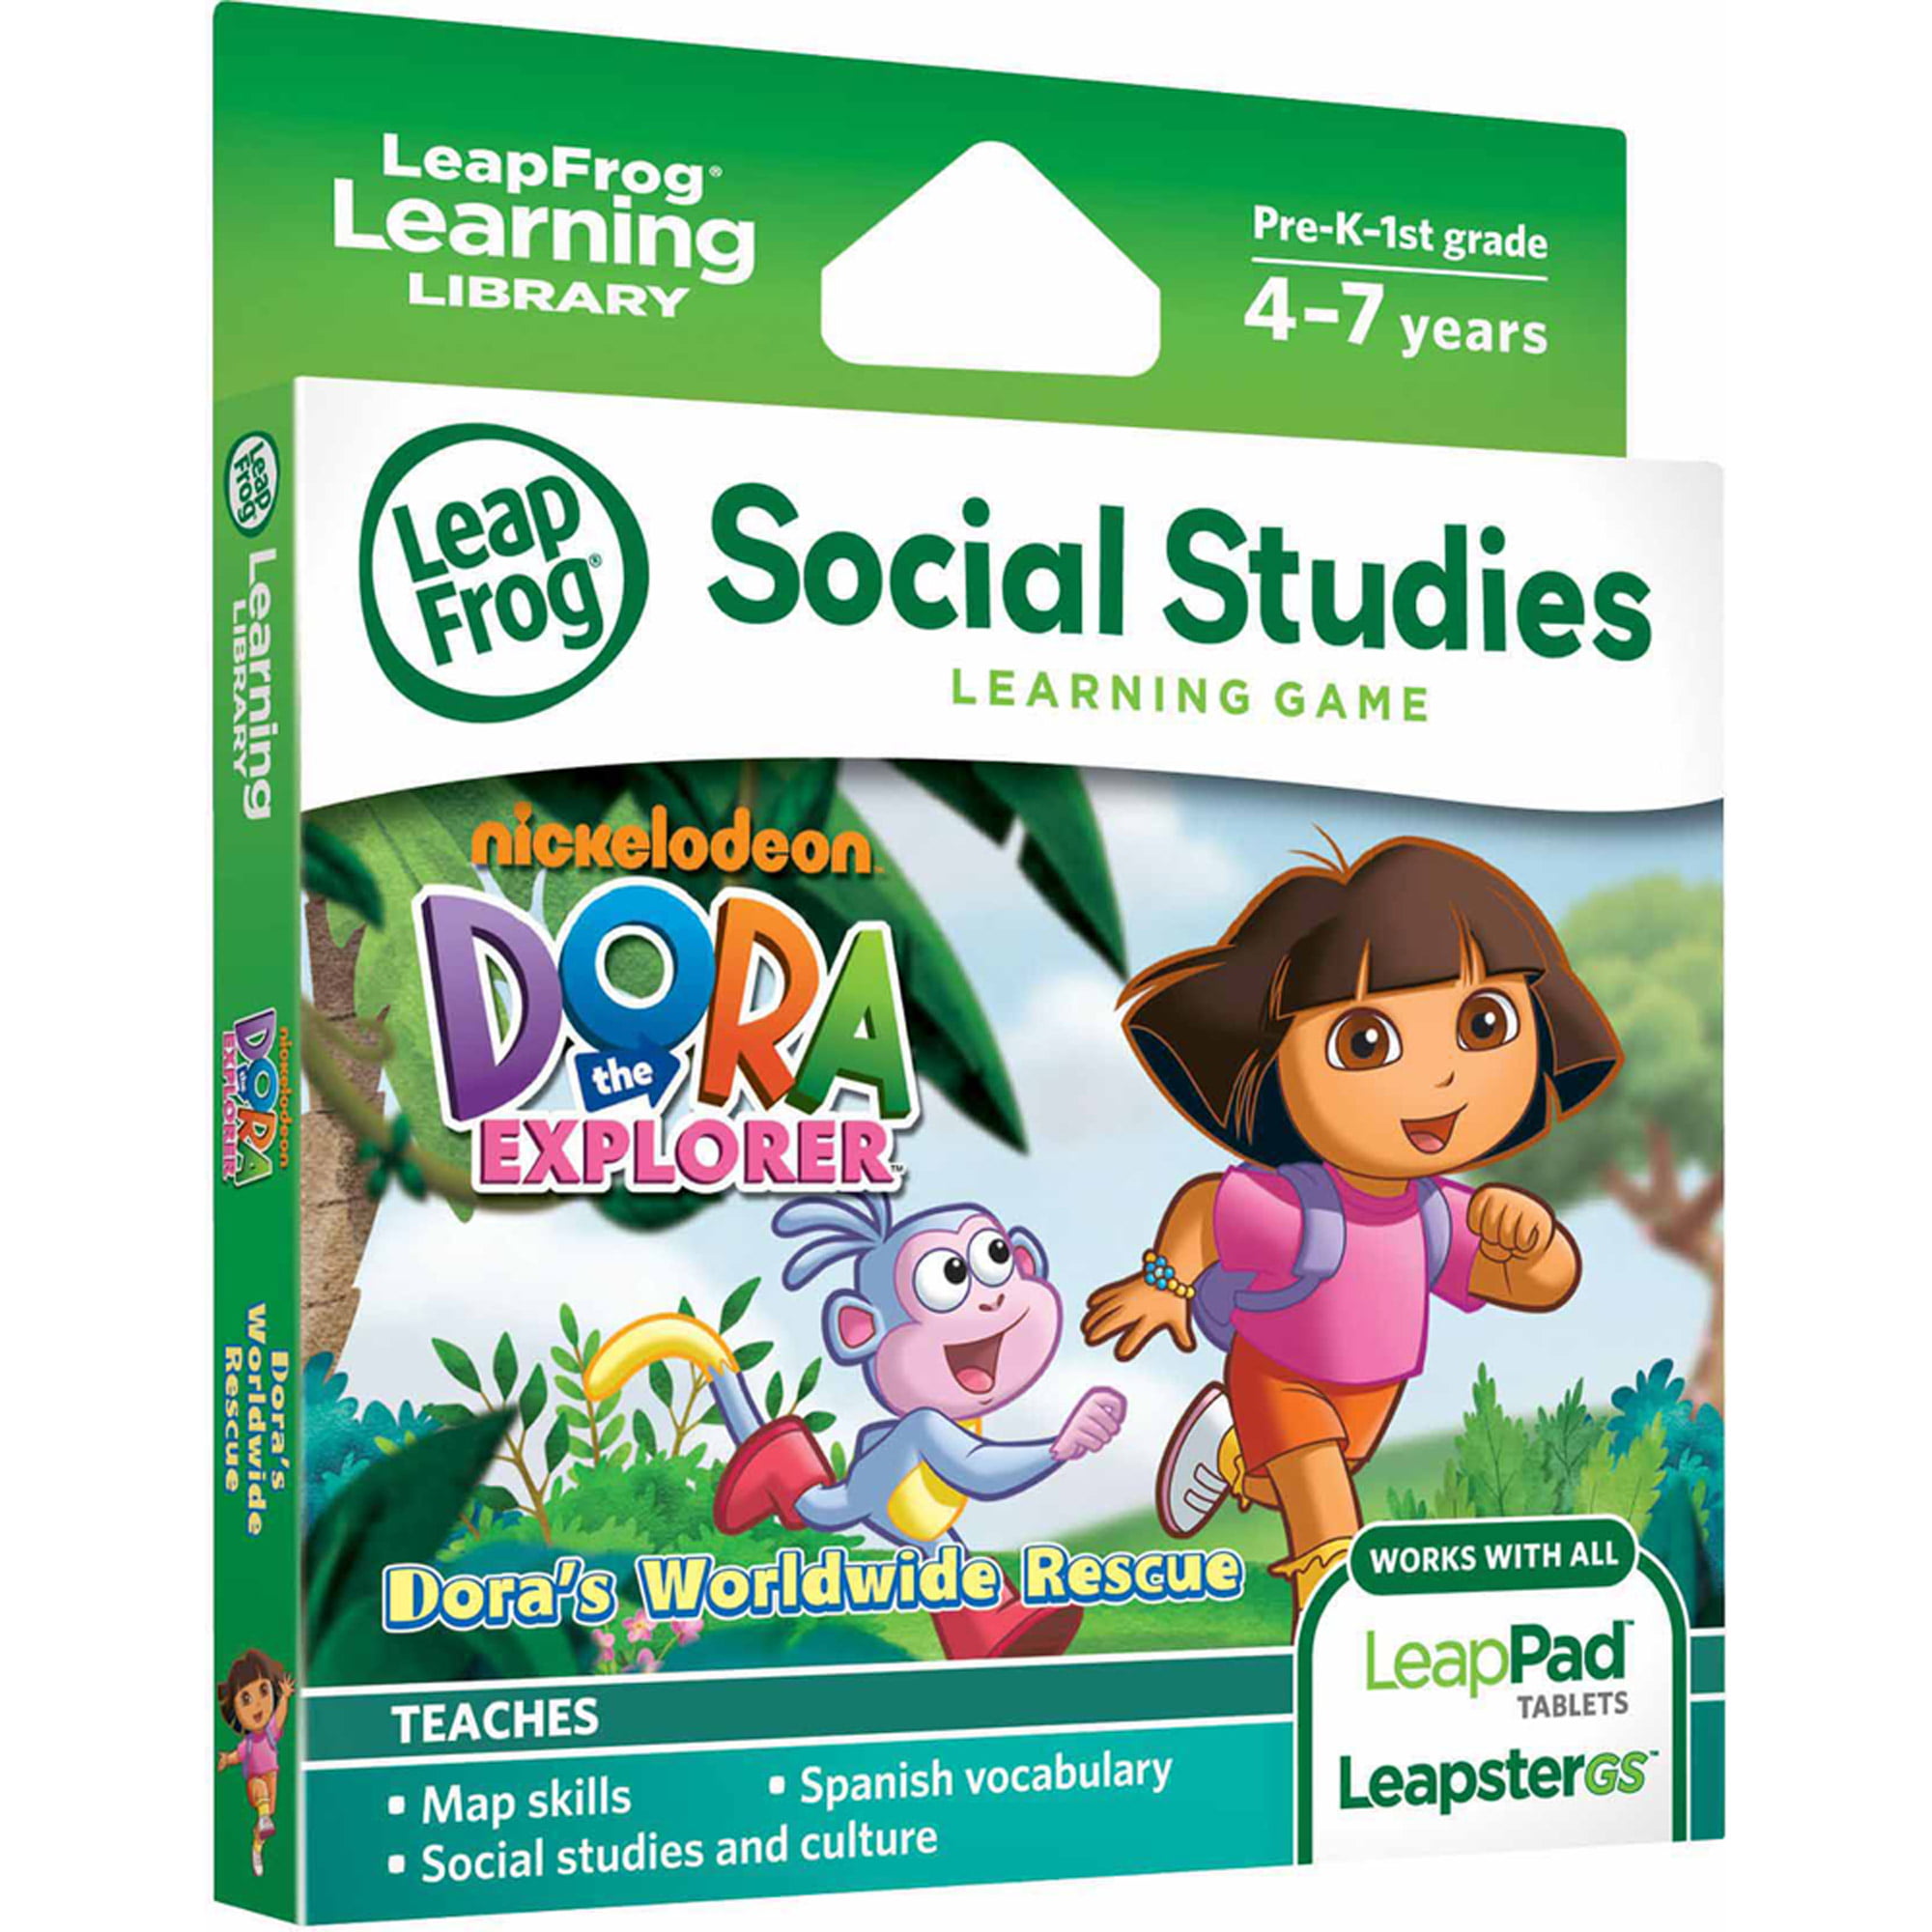 Leapfrog Leapster 2 L Max Game Buy 4 Get One Free Dora The Explorer Adventure 